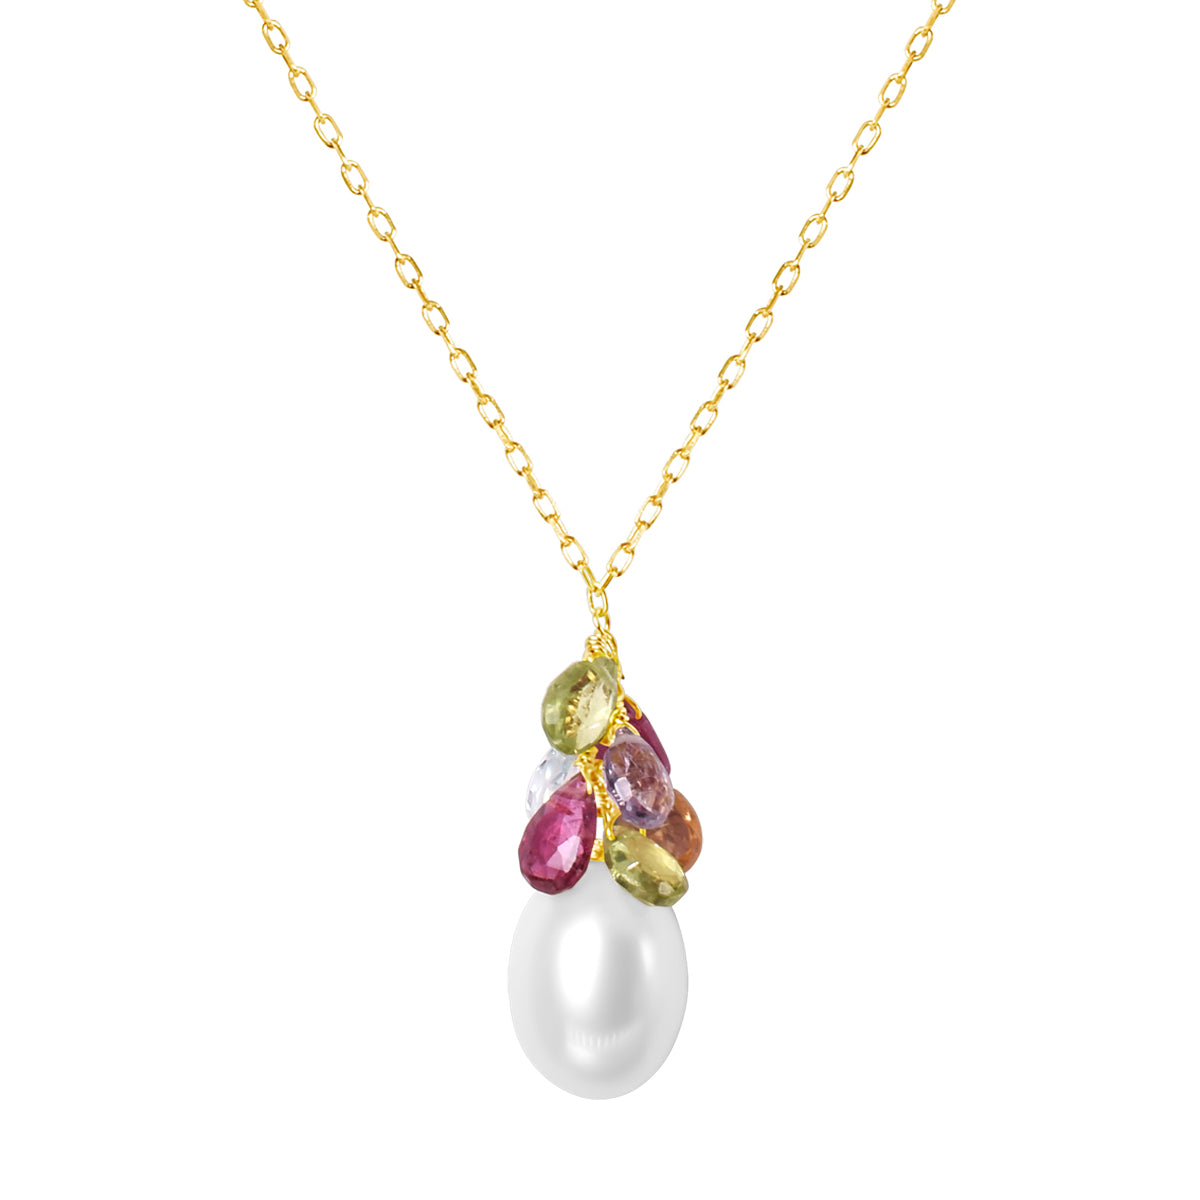 14k White OBL Freshwater Pearl, Peridot, Blue Topaz, Pink Tourmaline, and Amethyst Necklace 17" (14k wire)